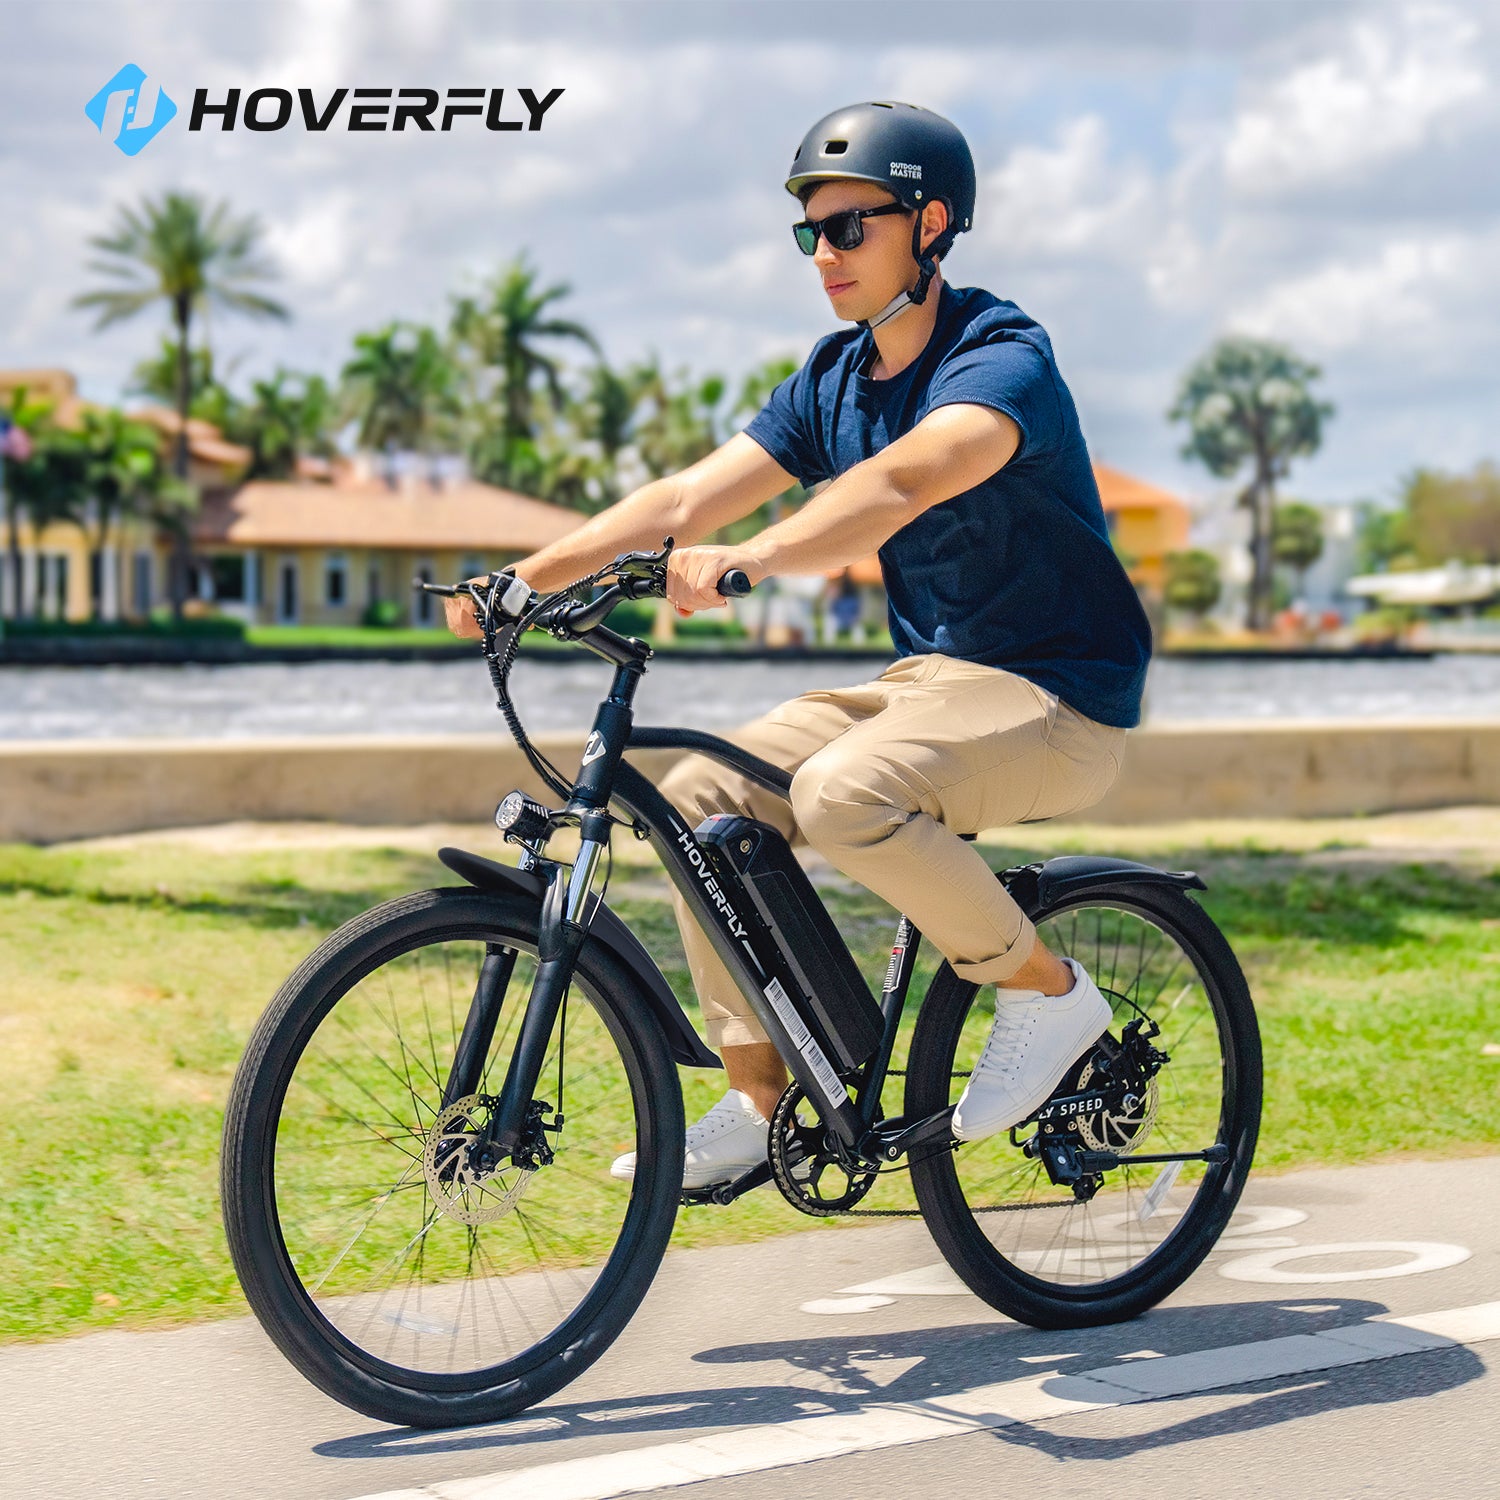 Hoverfly Ourea E-Bike Rider Cruising Effortlessly Through Urban Streets.